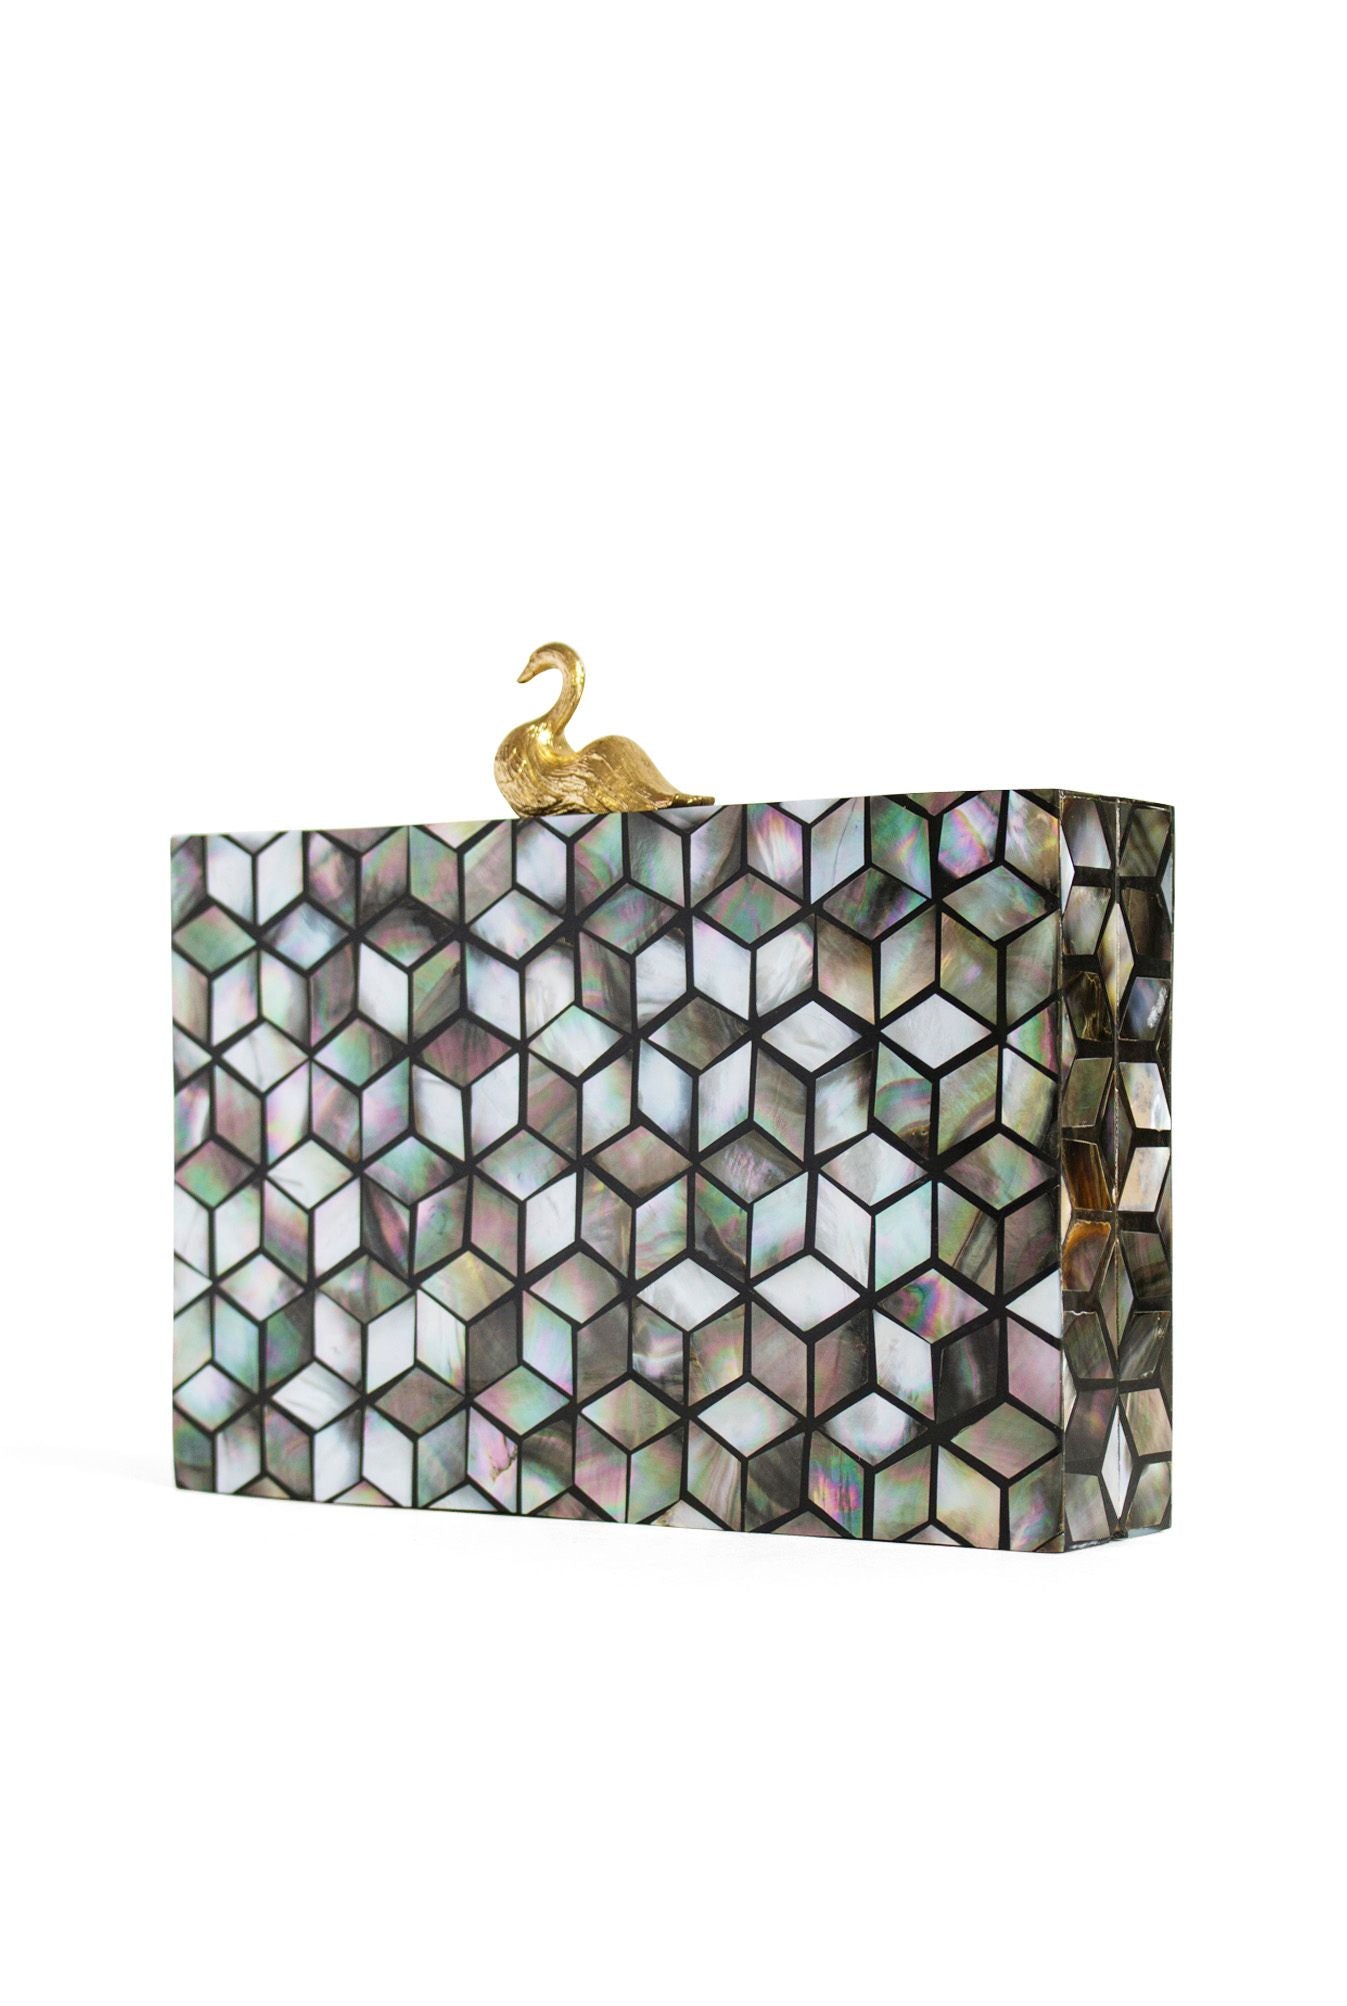 Elegant Mother Of Pearl Clutch Bag Pouch Clasp Evening Dinner Party Wedding  8